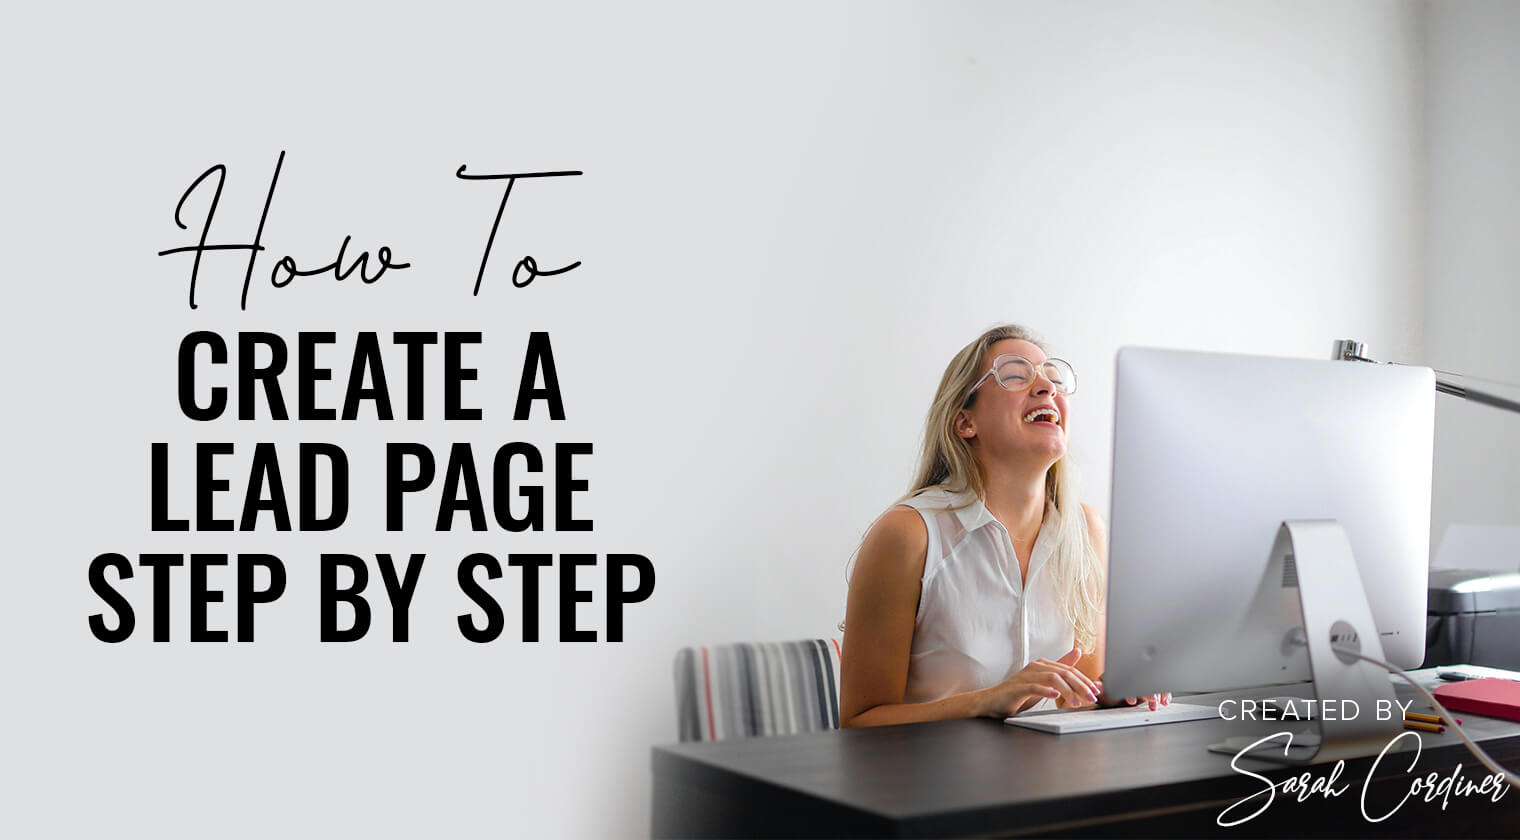 How To Create a Lead Page Step By Step